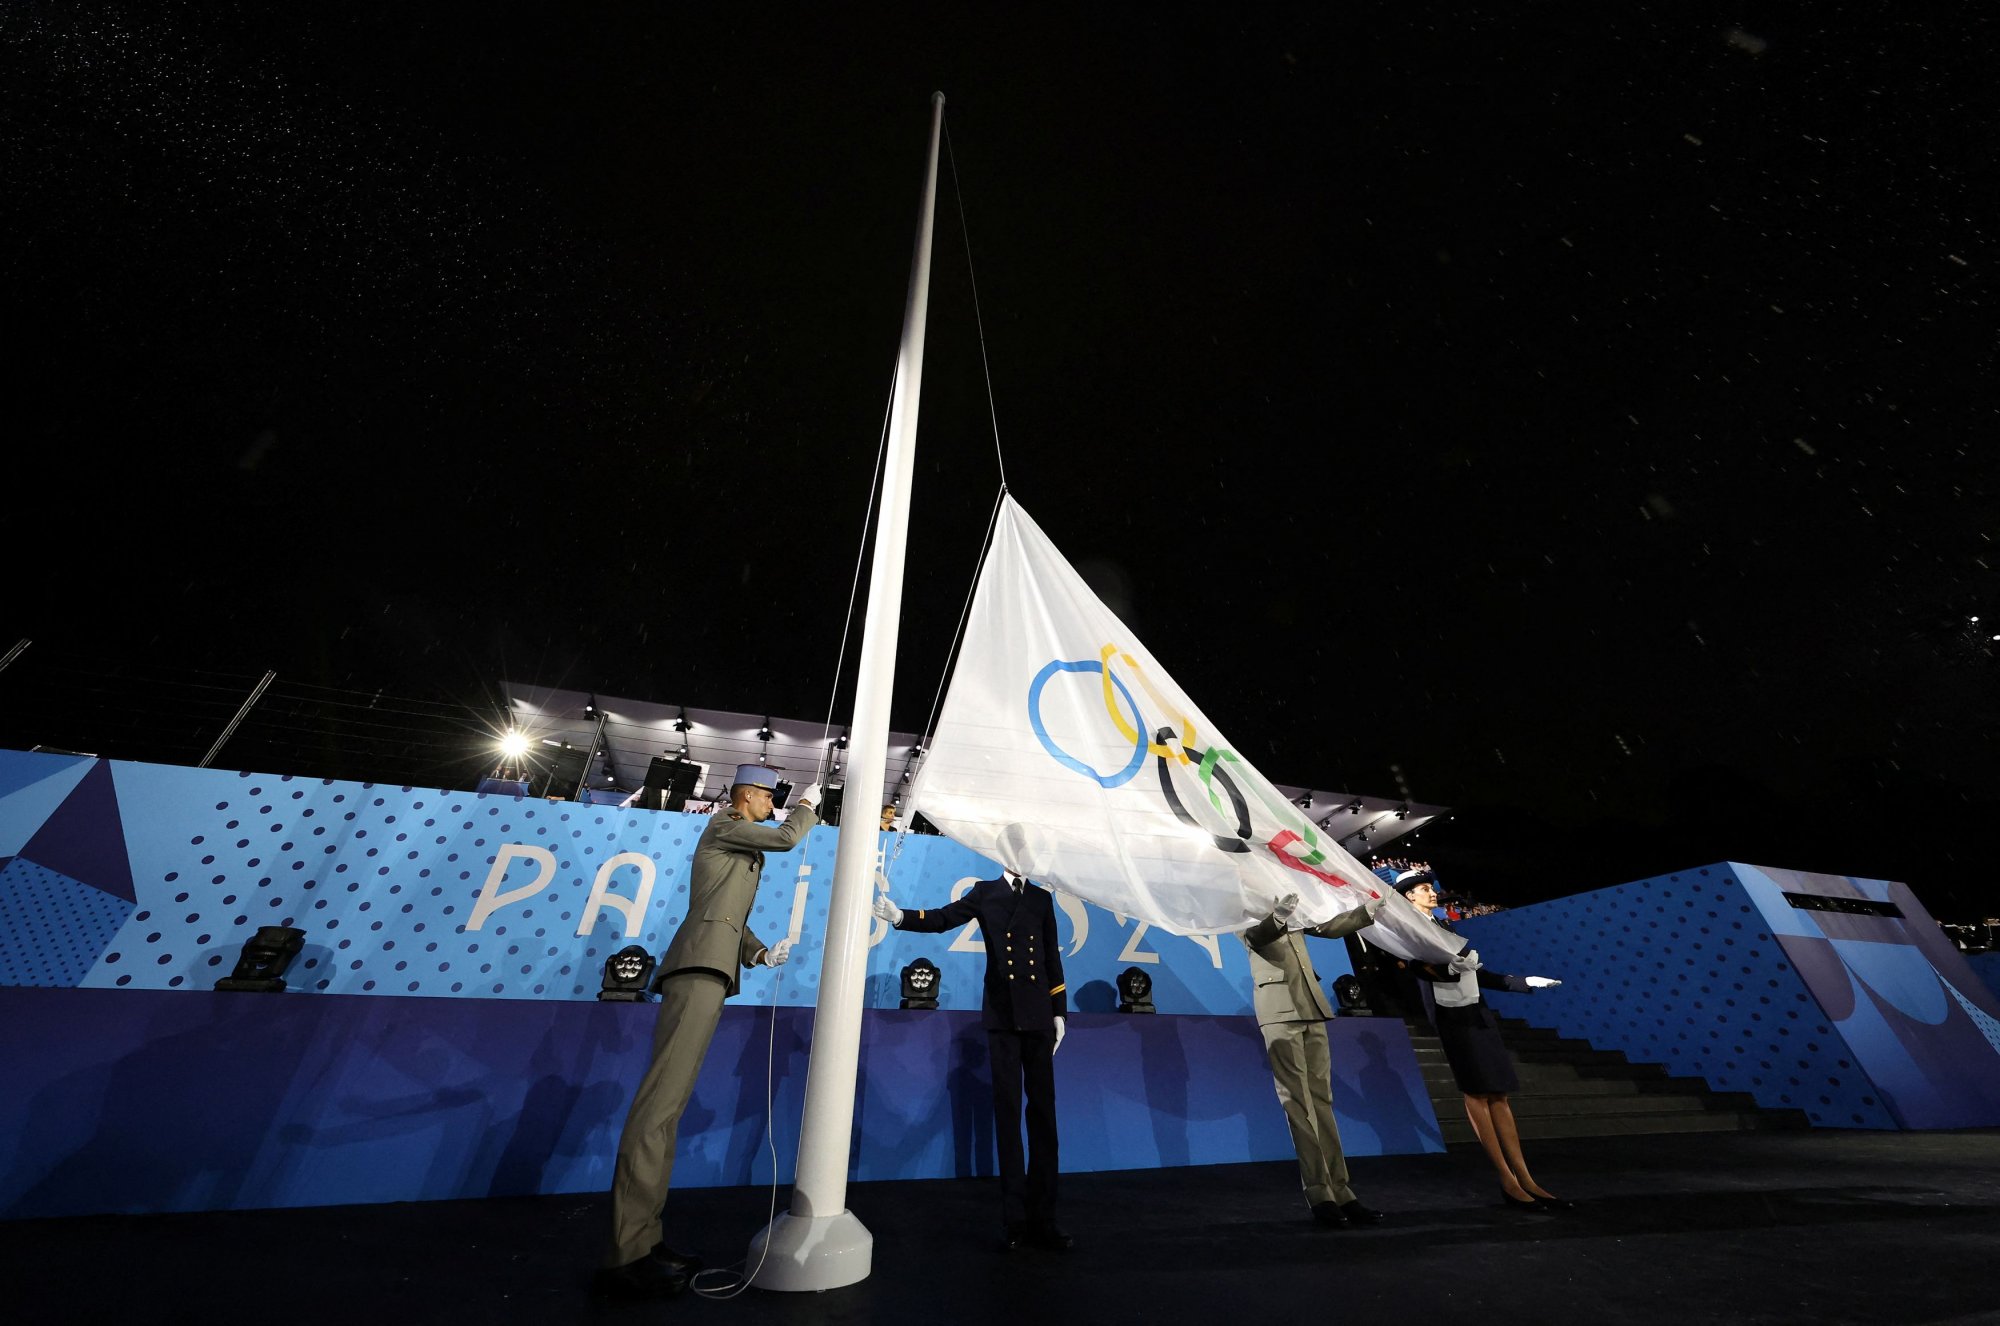 Paris 2024: The French raised the Olympic flag upside down!